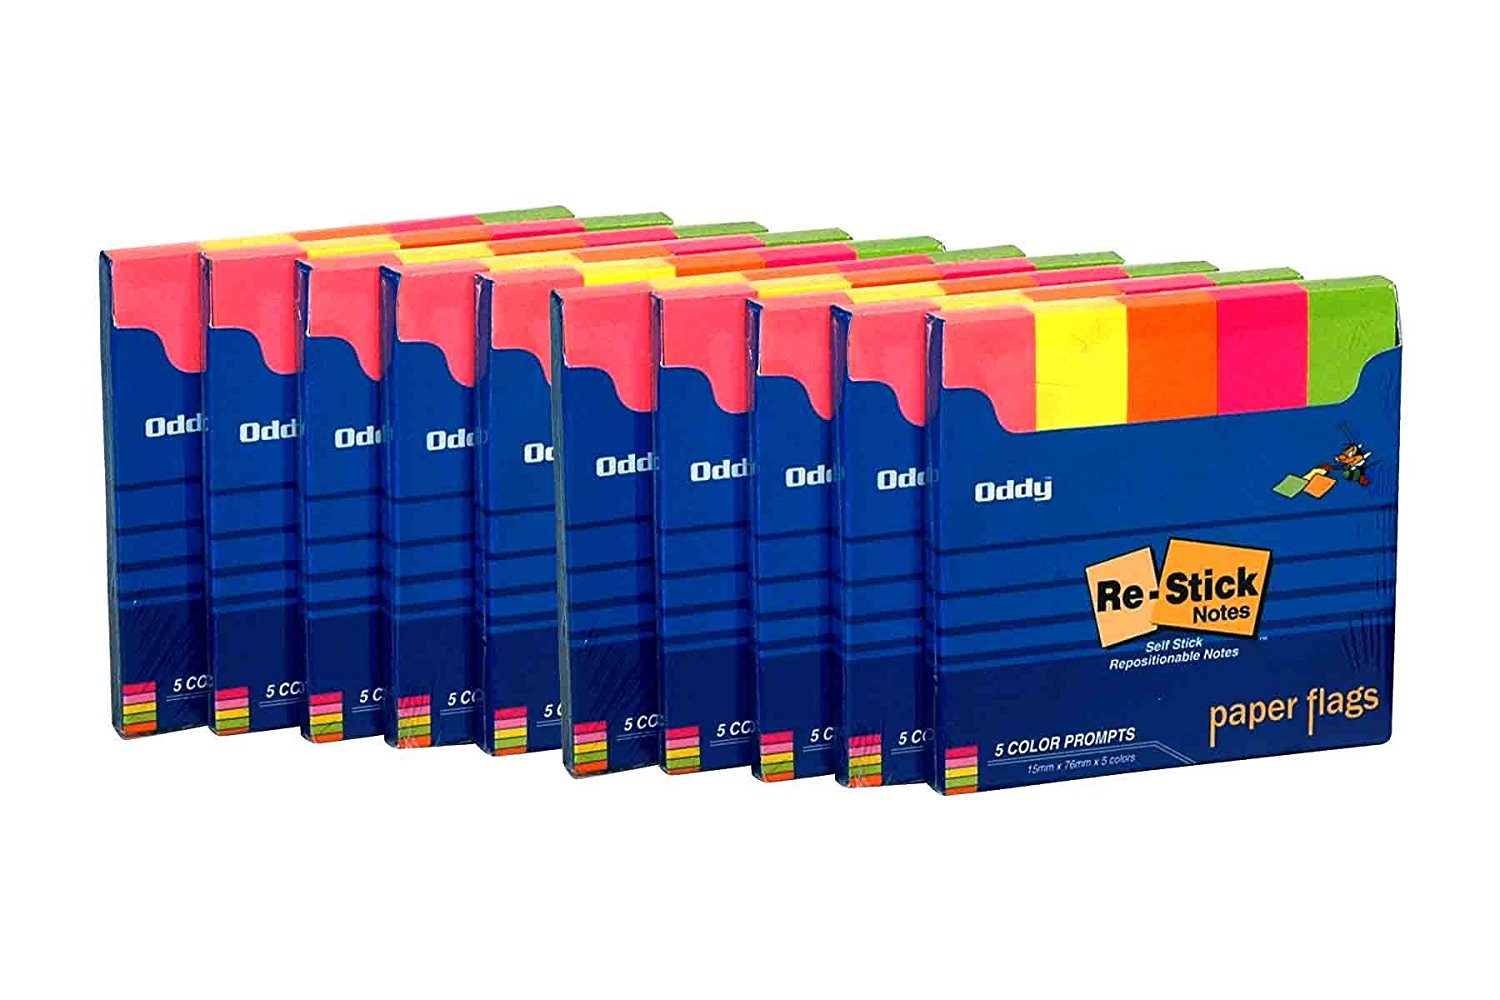 Oddy Re-stick Paper Flags / Prompts In 5 Colors 15mmx76mm